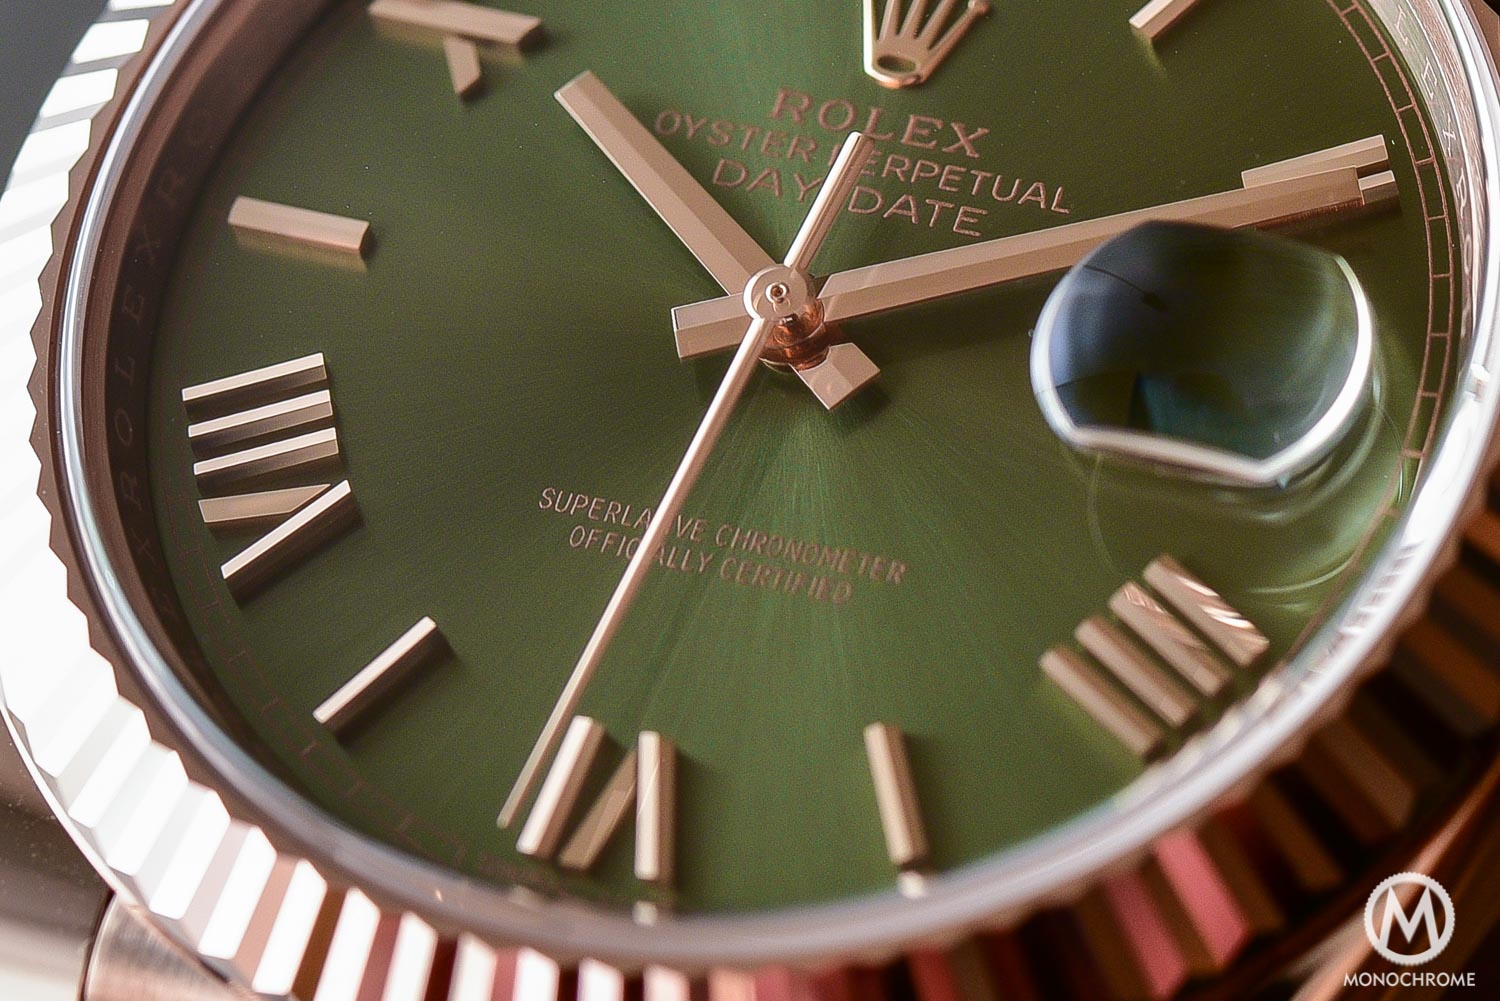 Rolex Day-Date 60th Anniversary Edition Green Dial - Ref. 228235